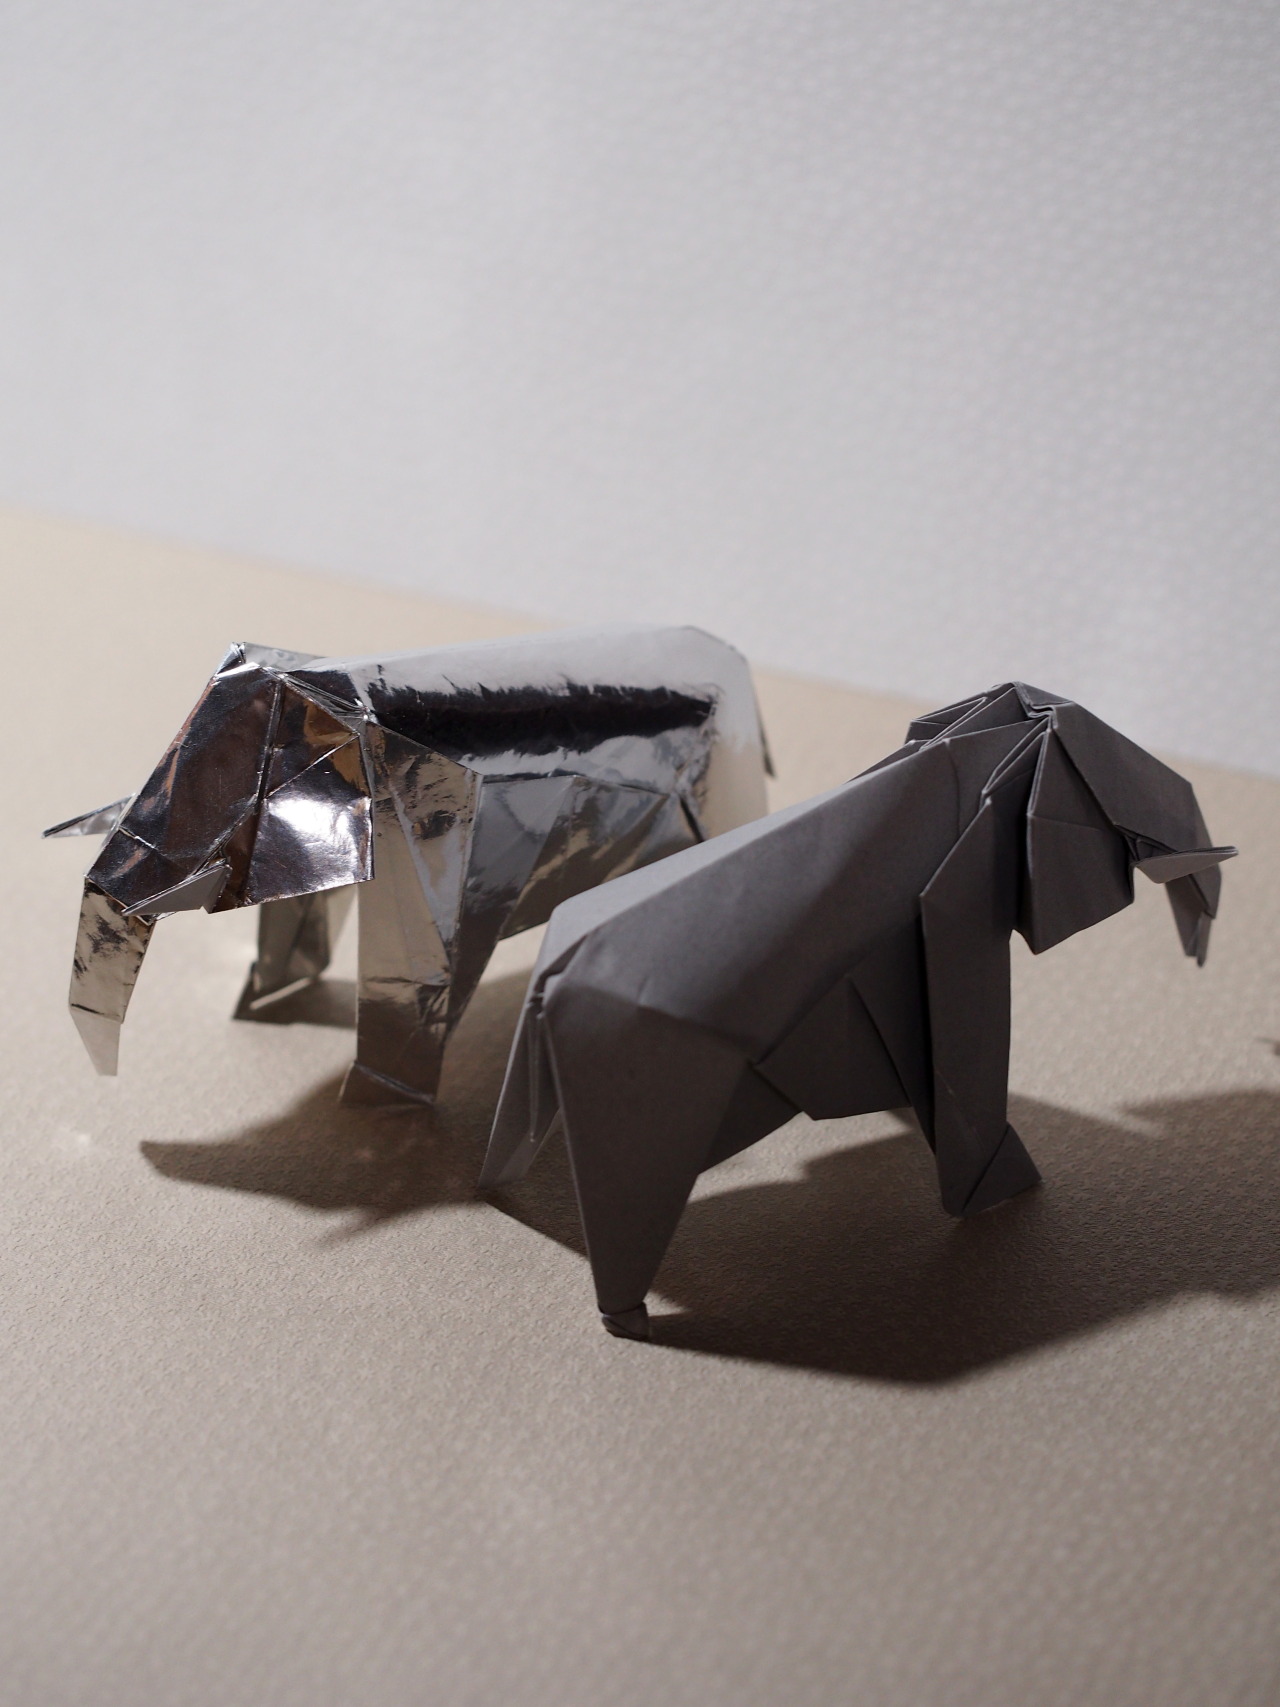 Just An Art Dork Trying To Get By Markunsan Origami Youtubeでゾウの折り紙の動画に触発されて